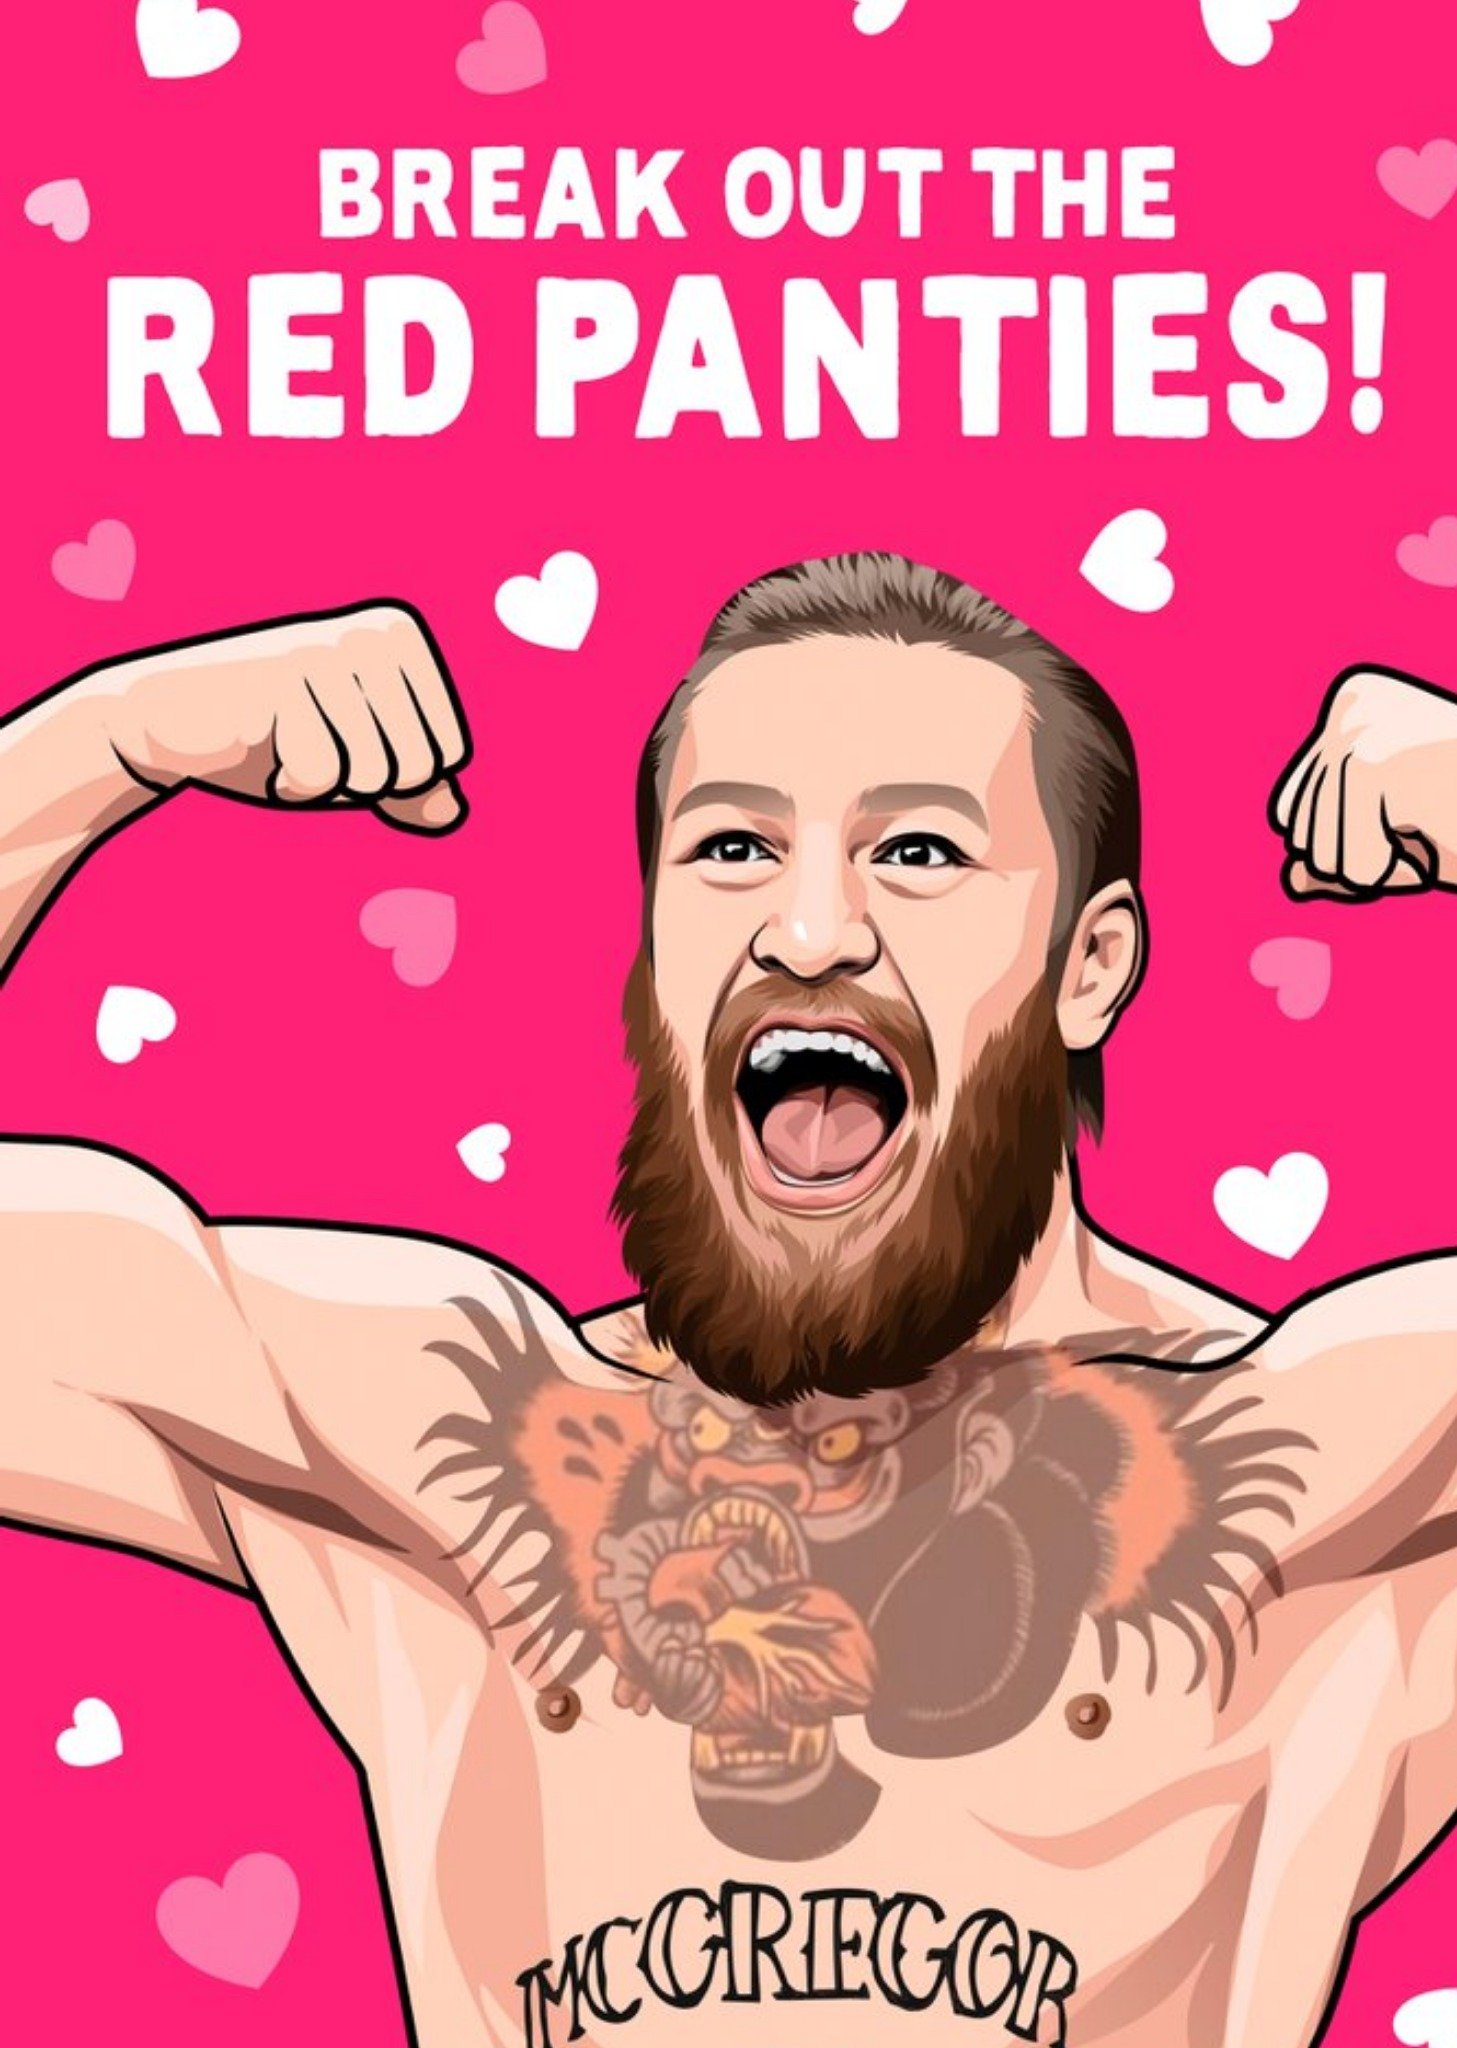 All Things Banter Break Out The Red Panties Sport Celebrity Card, Large